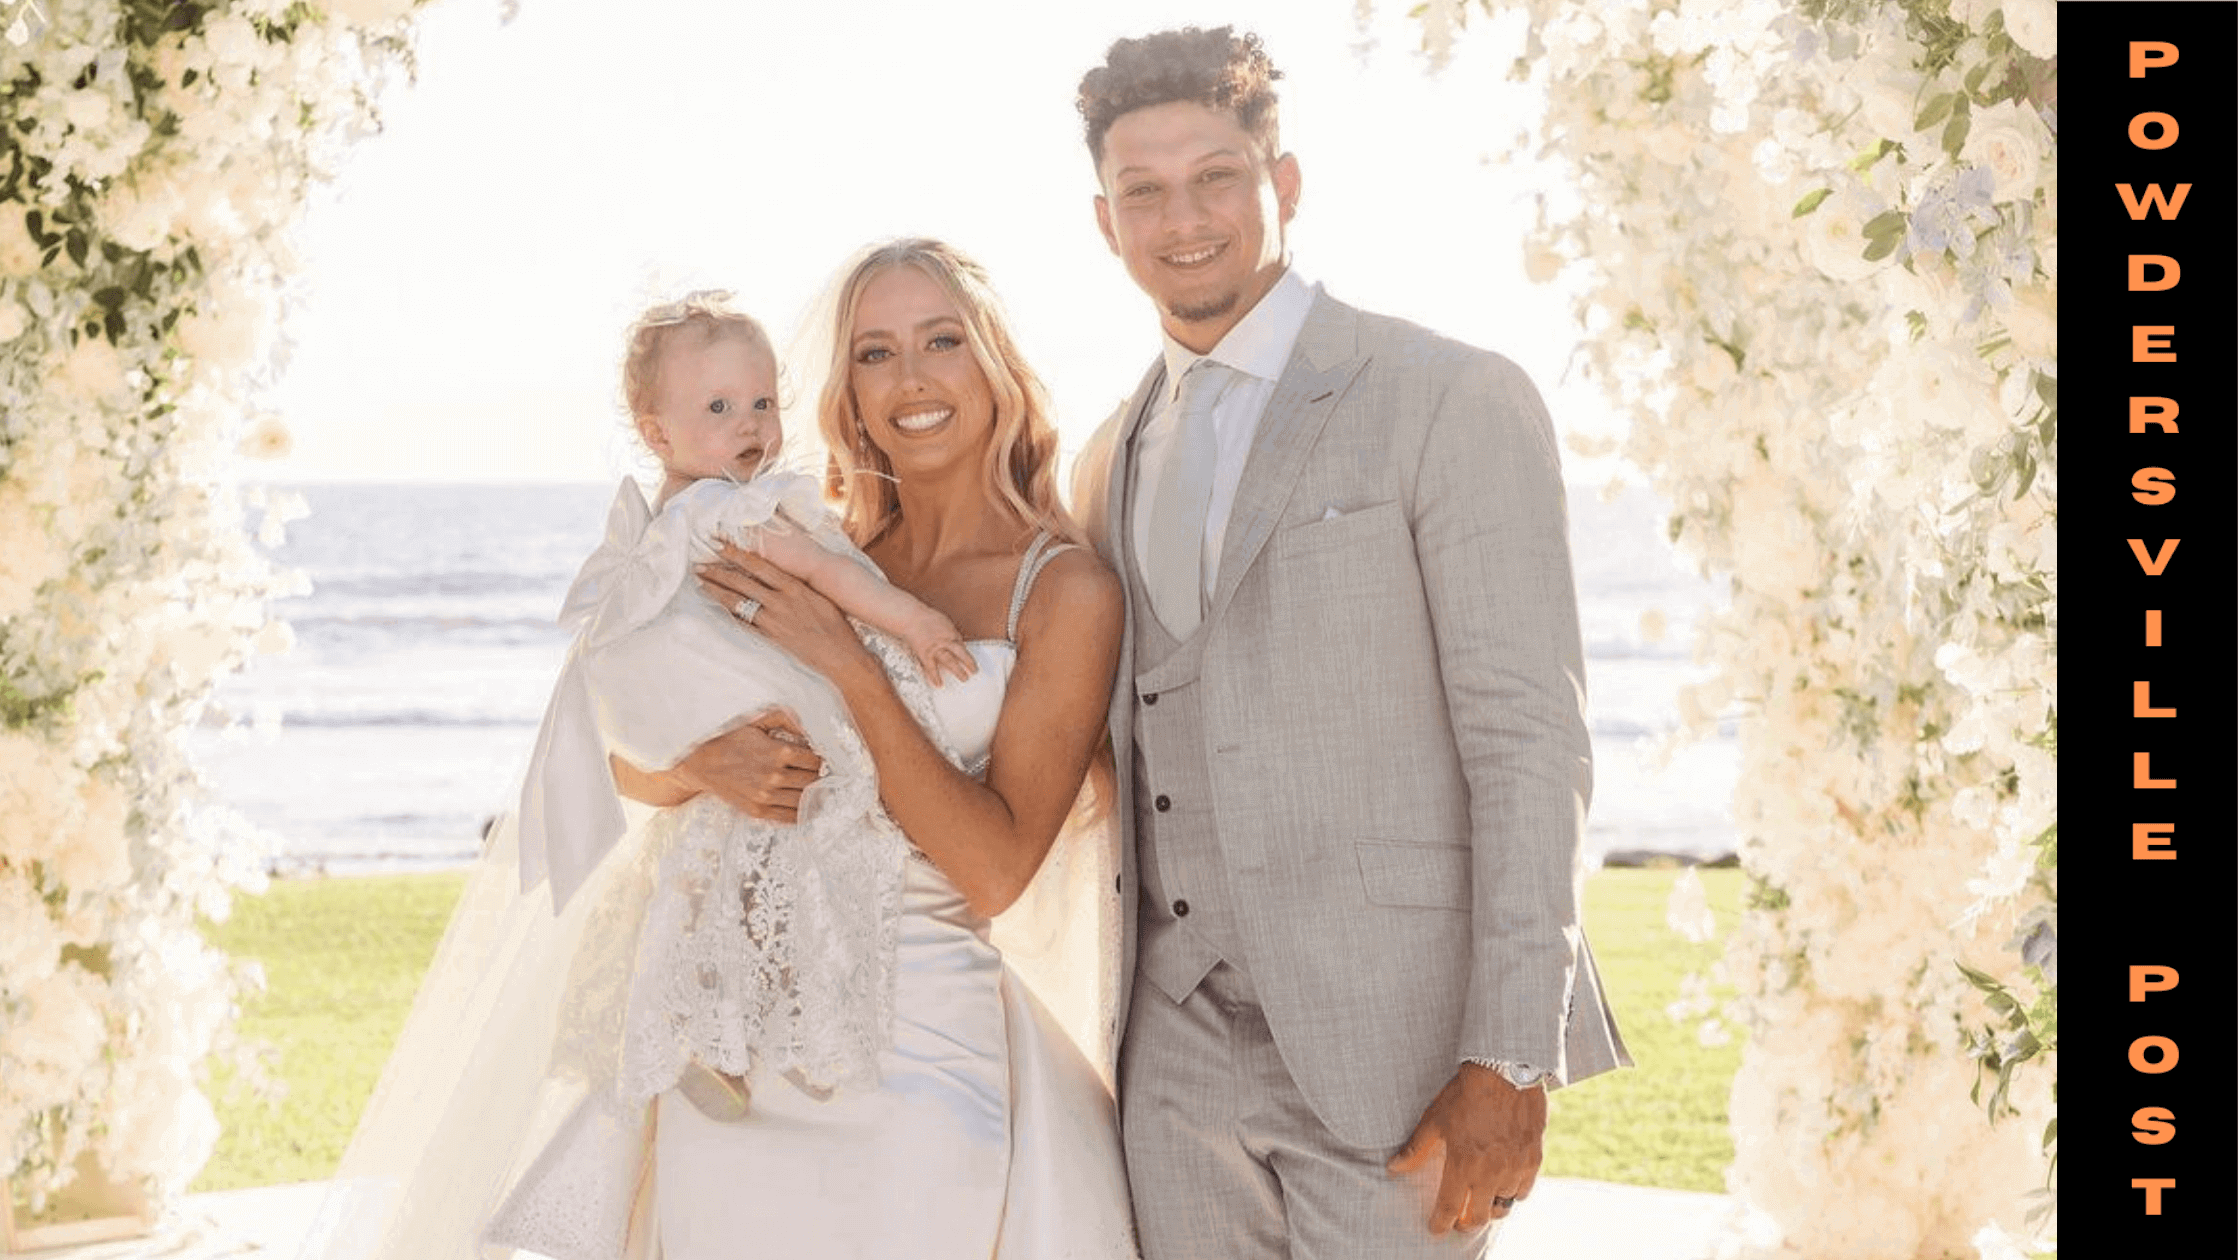 The Daughter Of Patrick Mahomes And Brittany, Was A Star At Her Parent's Wedding, Check Out For More Details